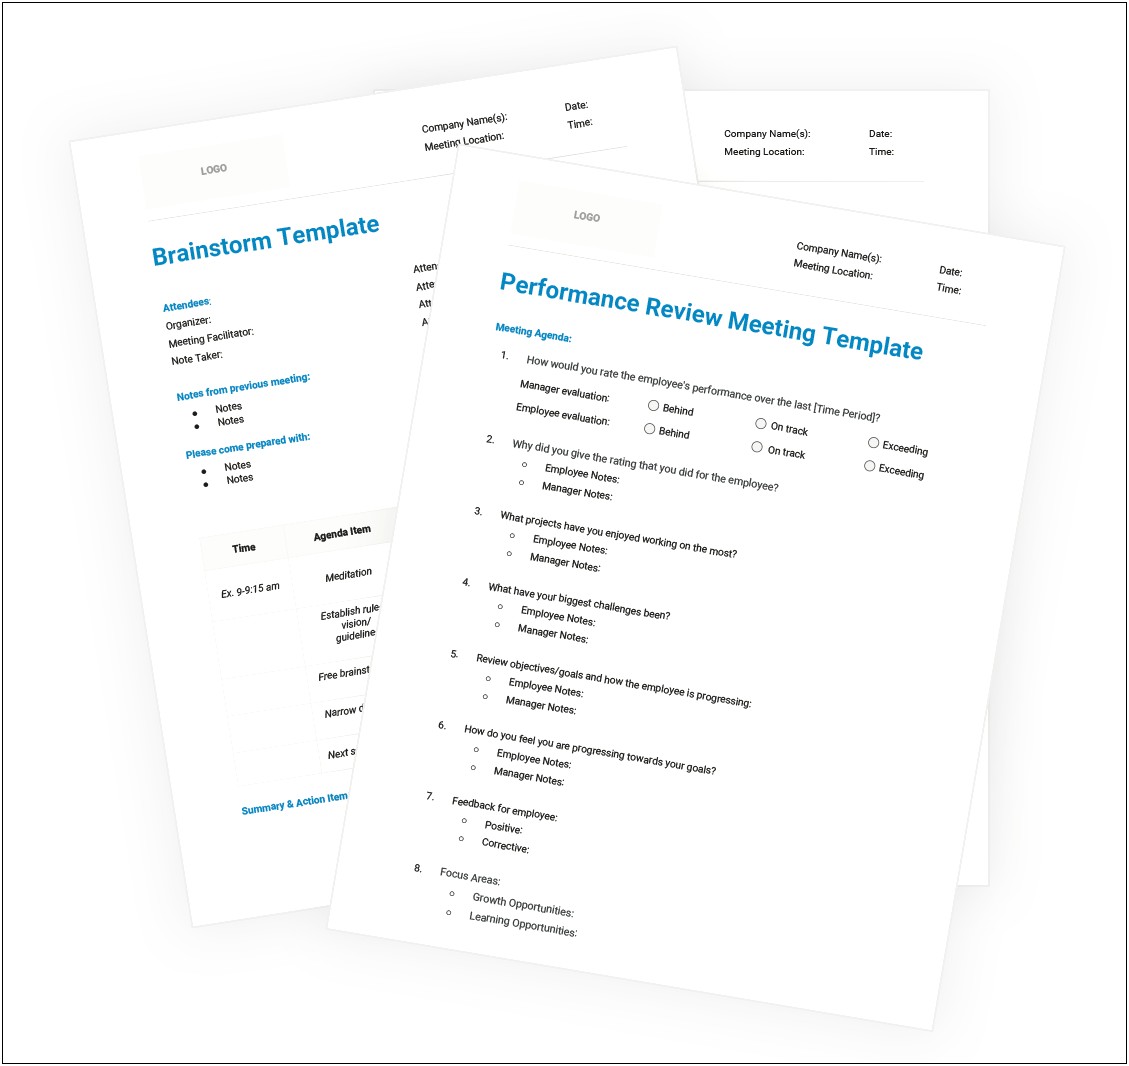 agenda-templates-for-meetings-free-download-resume-example-gallery